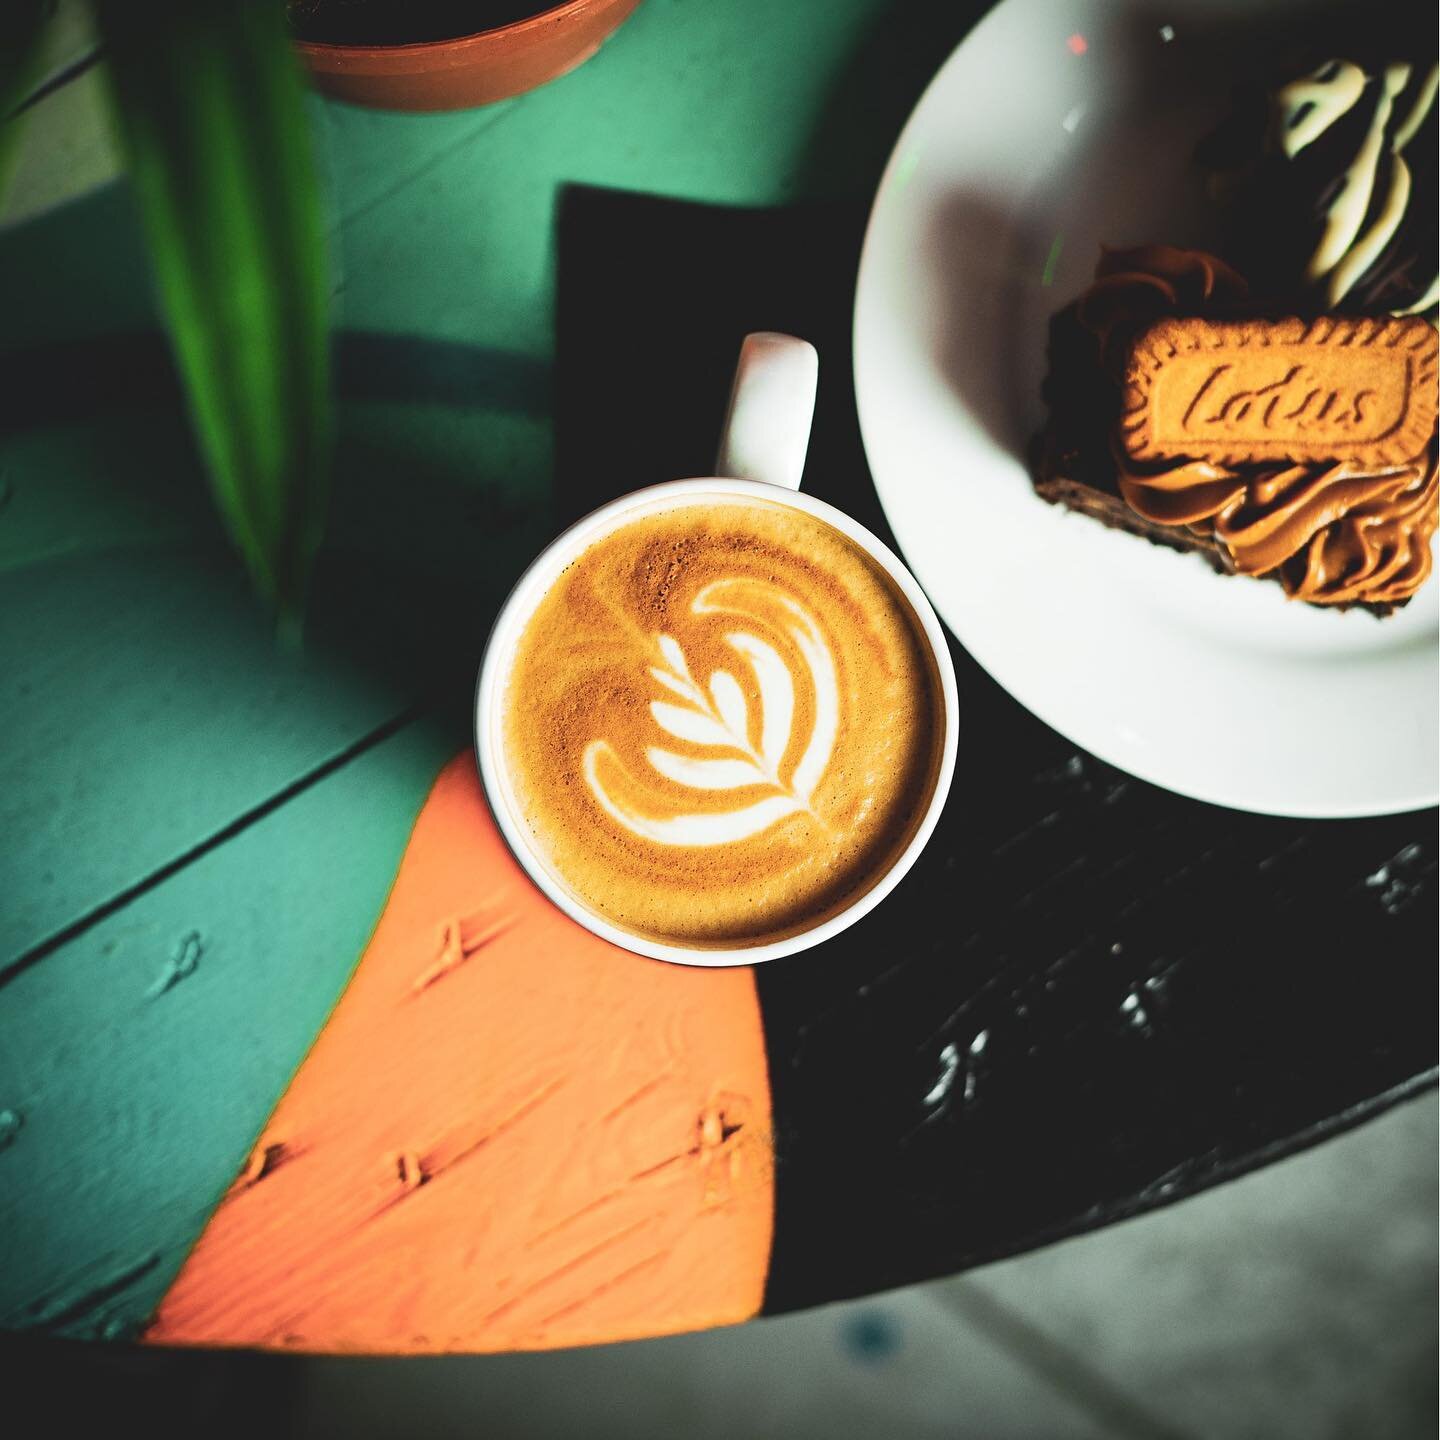 What goes best with a cup of Jungle coffee? Another cup! Grab the cosy corner and grab your morning fix. The hatch opens at 10am, we&rsquo;ll see you soon!⠀
⠀
⠀
⠀
#theloadingbay #theloadingbaynorthshields #northshieldsfishquay #streetfood #coffee #fo